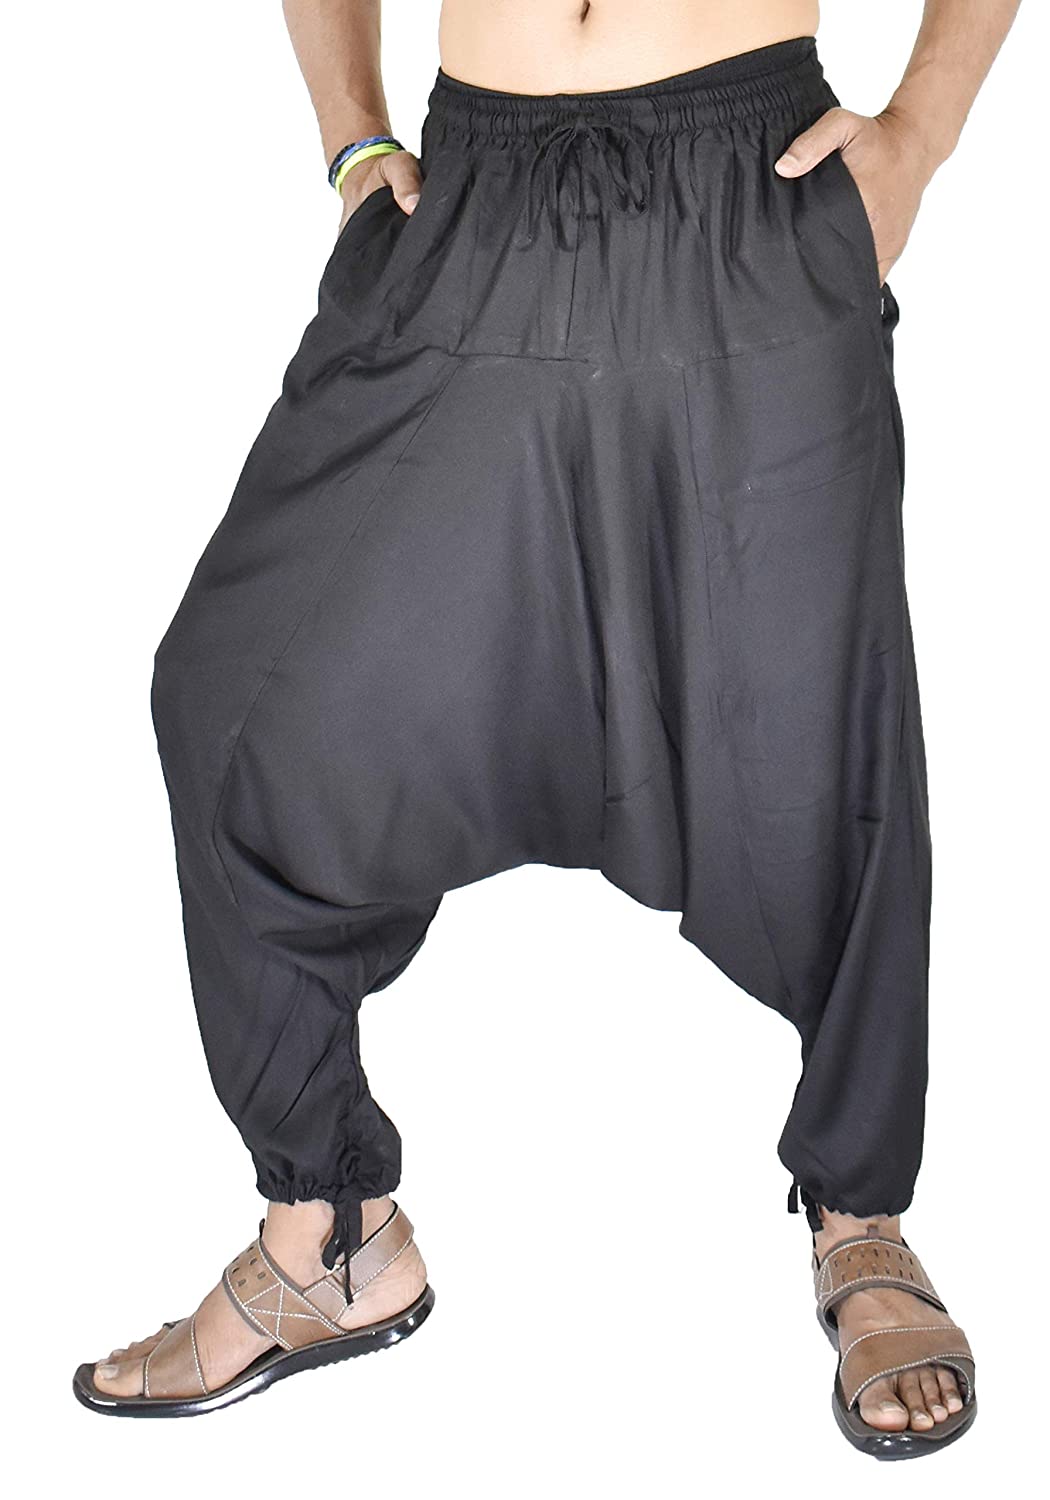 Buy Men's Casual Harem Pant for Daily Use Summer wear Black at Amazon.in